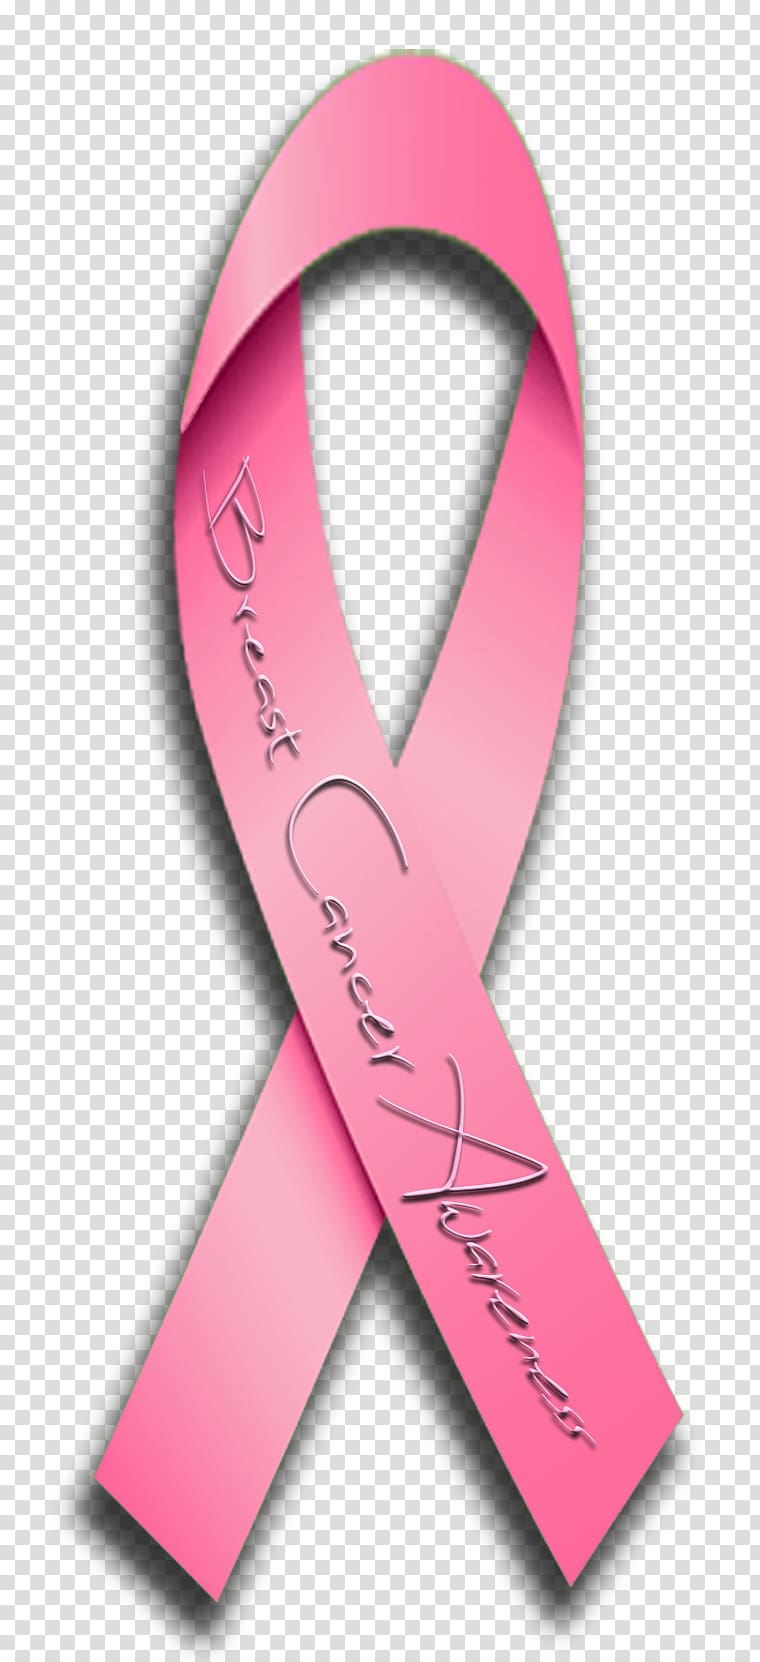 Breast Cancer Awareness Month Pink ribbon Awareness ribbon, pink ribbon transparent background PNG clipart